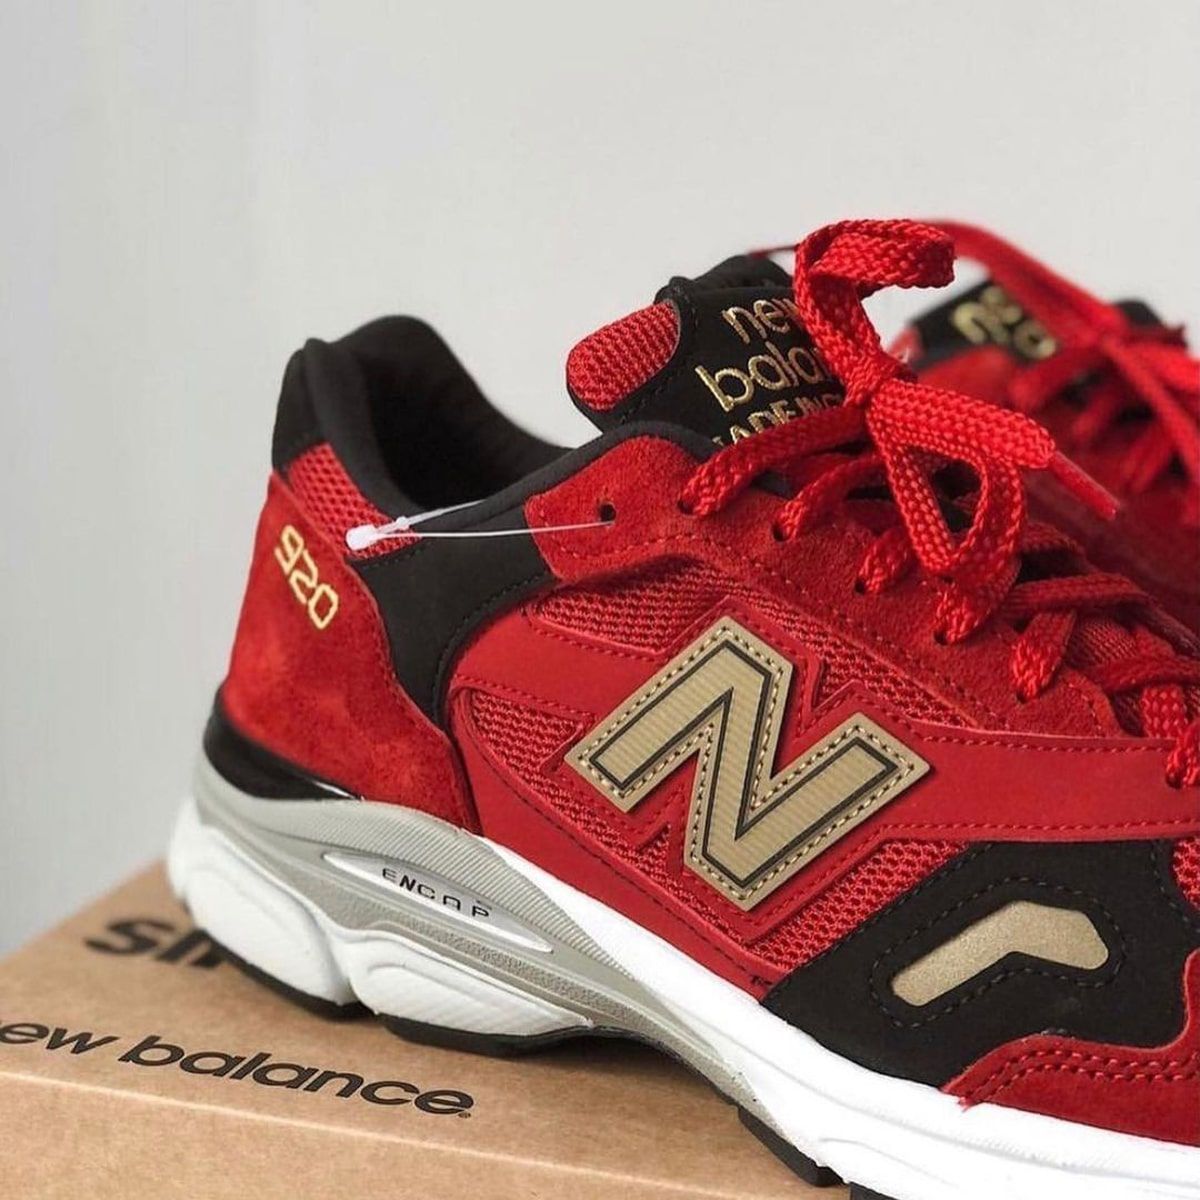 New Balance Celebrate Chinese New Year with NB 920 “Year Of The Ox 